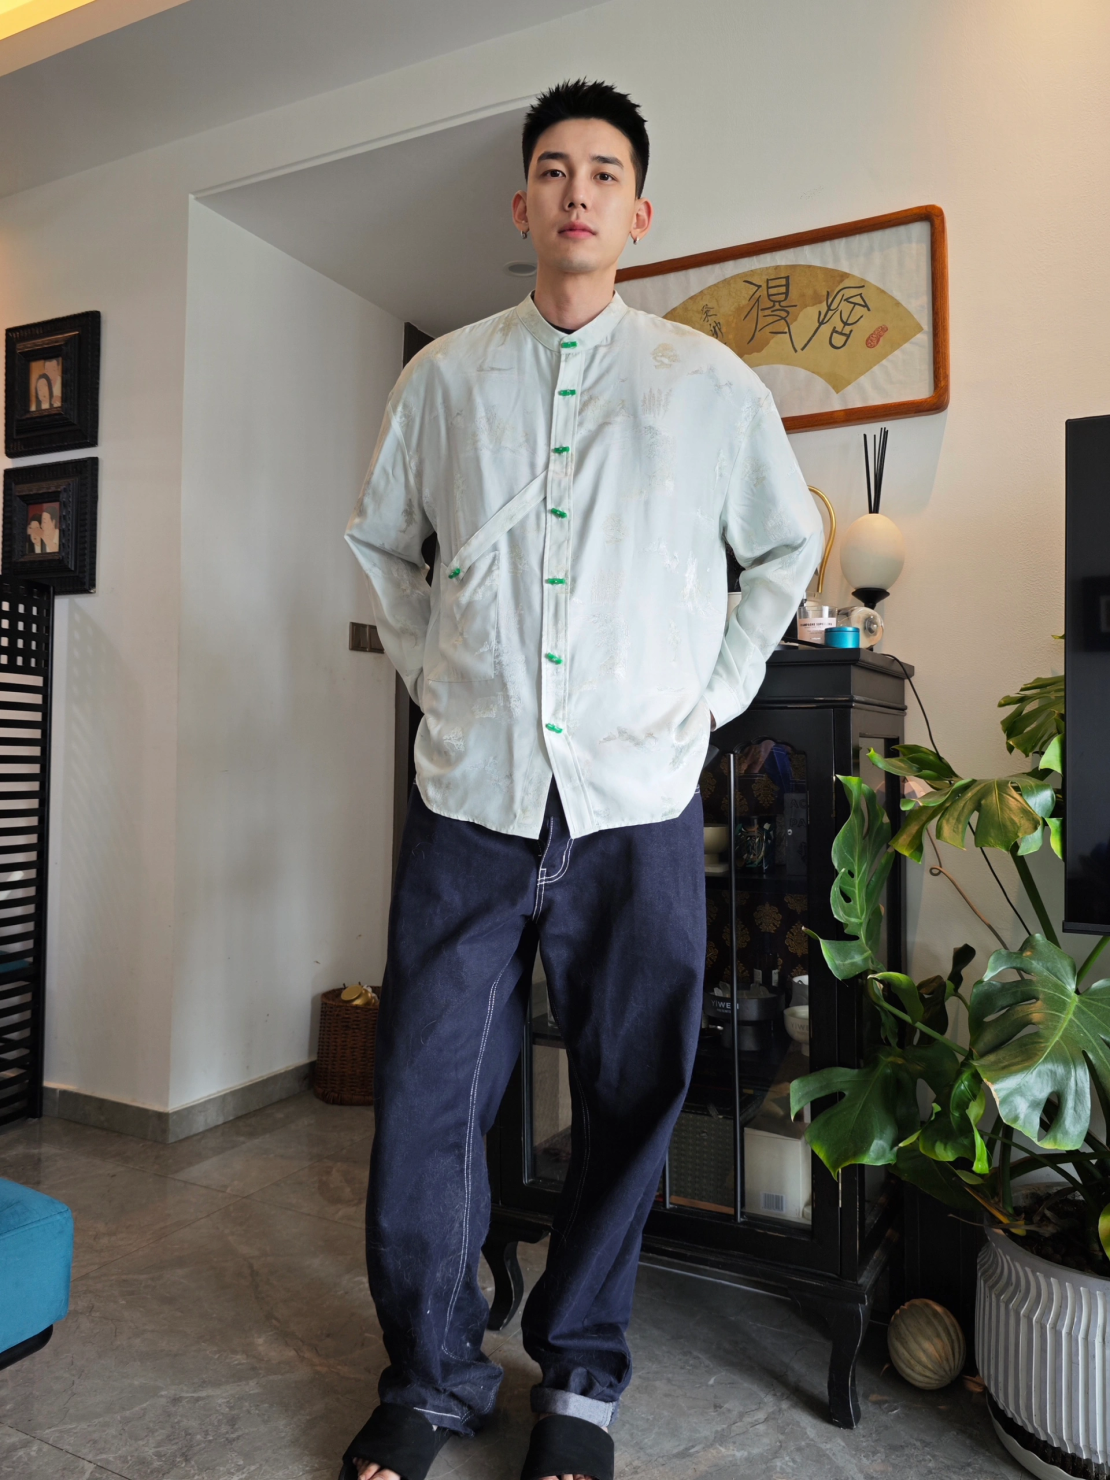 Designer Huang Weizhe, who goes by Azhe online, often posts ideas about how to embrace the 